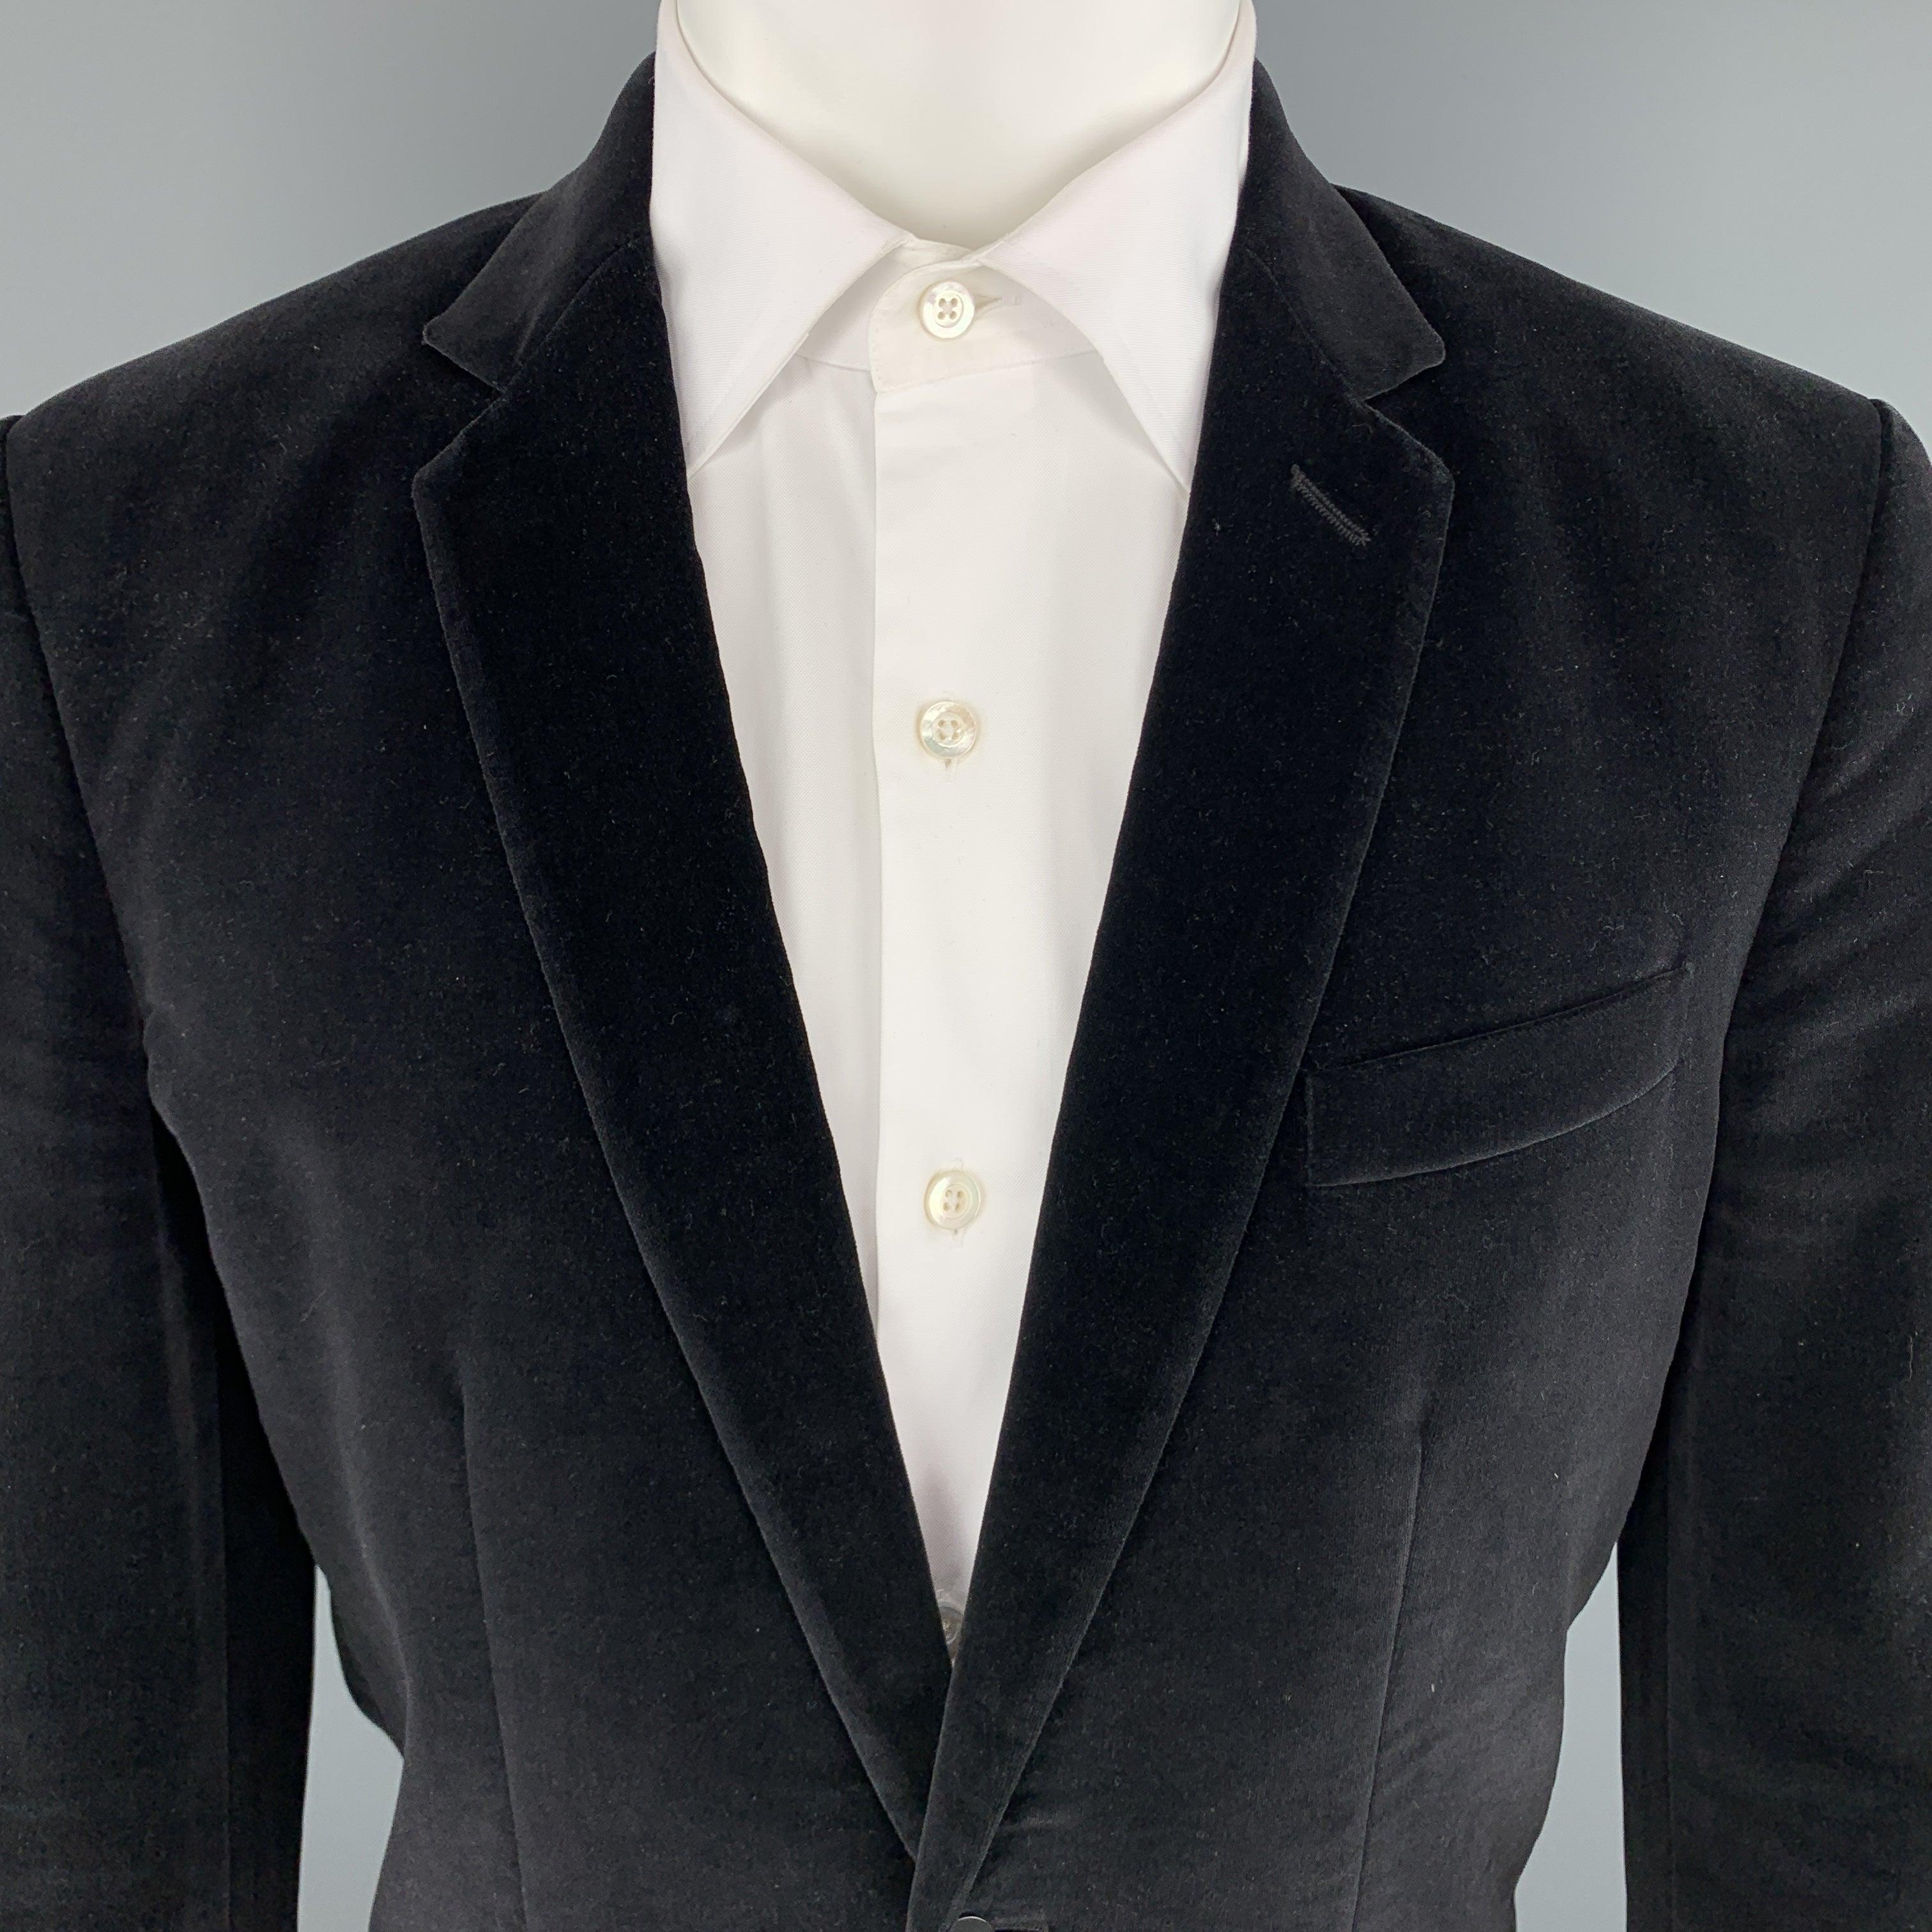 MARC JACOBS
sport coat comes in black velvet with a notch lapel, single breasted, two button front, and single vented back. Made in Italy.Excellent Pre-Owned Condition. 

Marked:   IT 46 

Measurements: 
 
Shoulder: 18 inches Chest:
41 inches